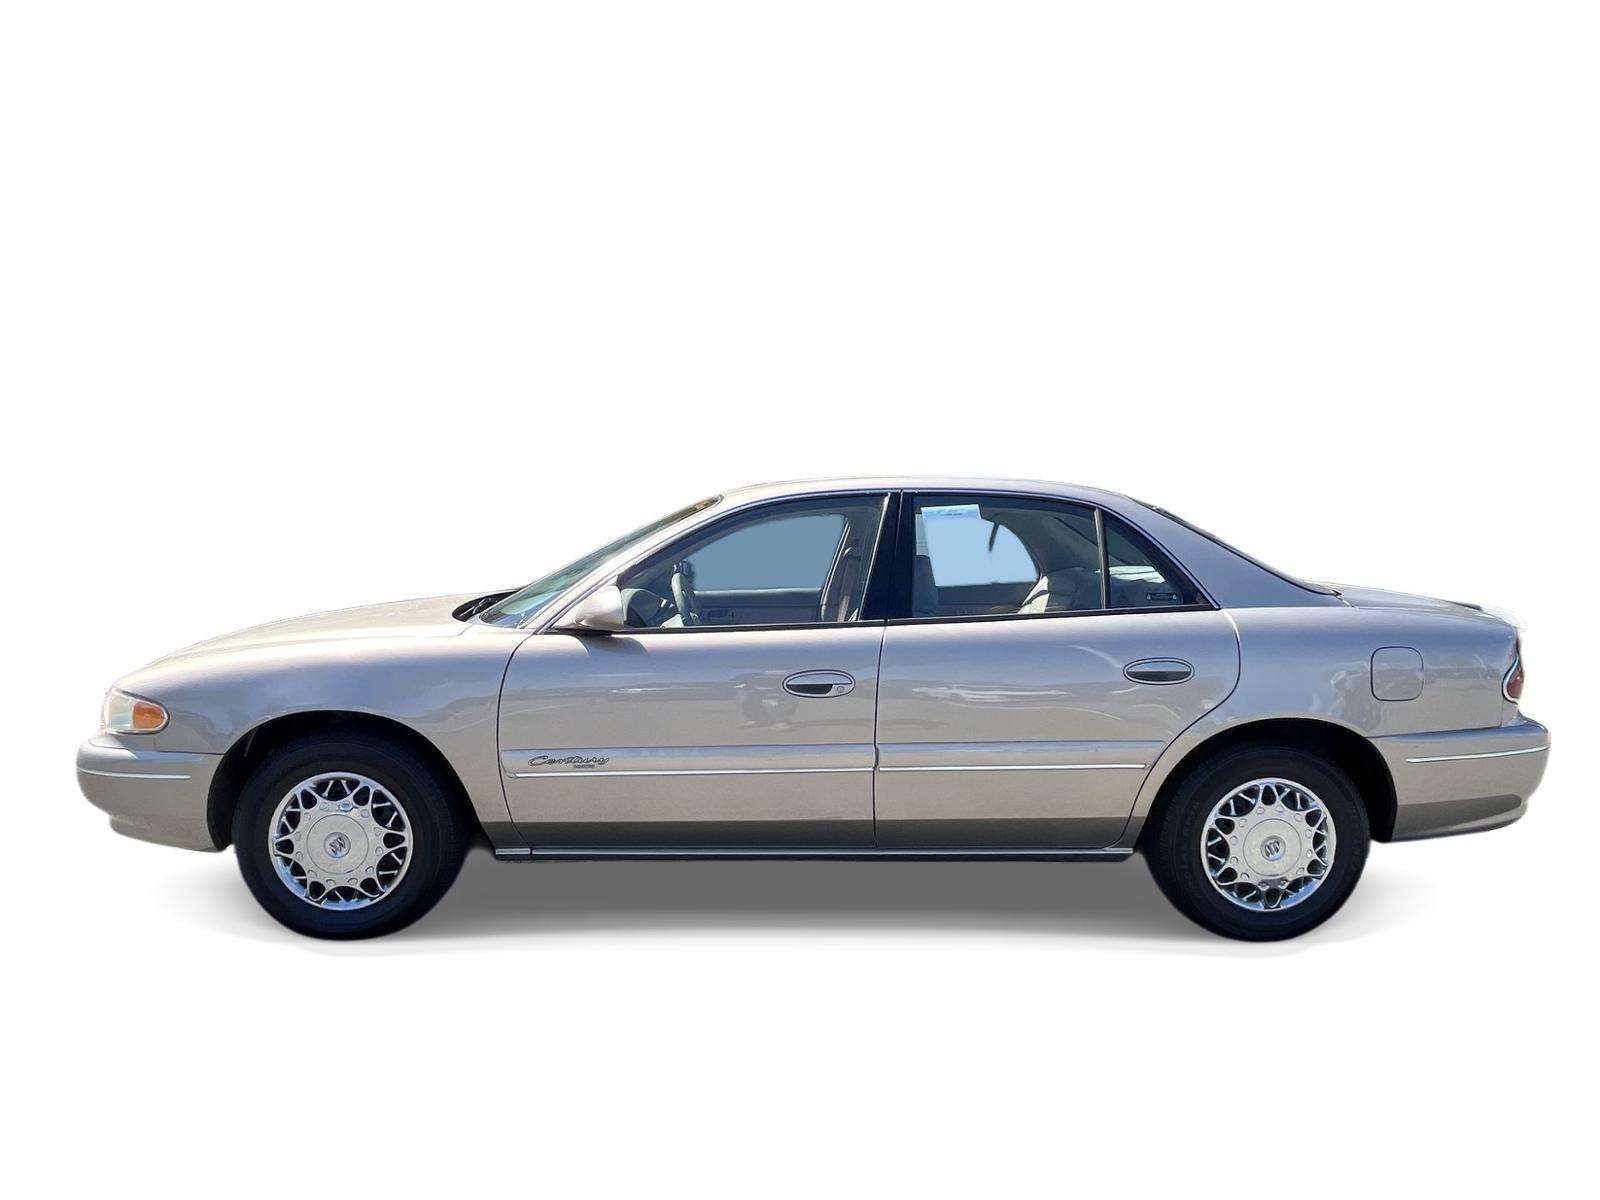 Pre-Owned 2002 Buick Century 4dr Sdn Limited 4dr Car in Mount Airy #2163B |  Mount Airy Toyota